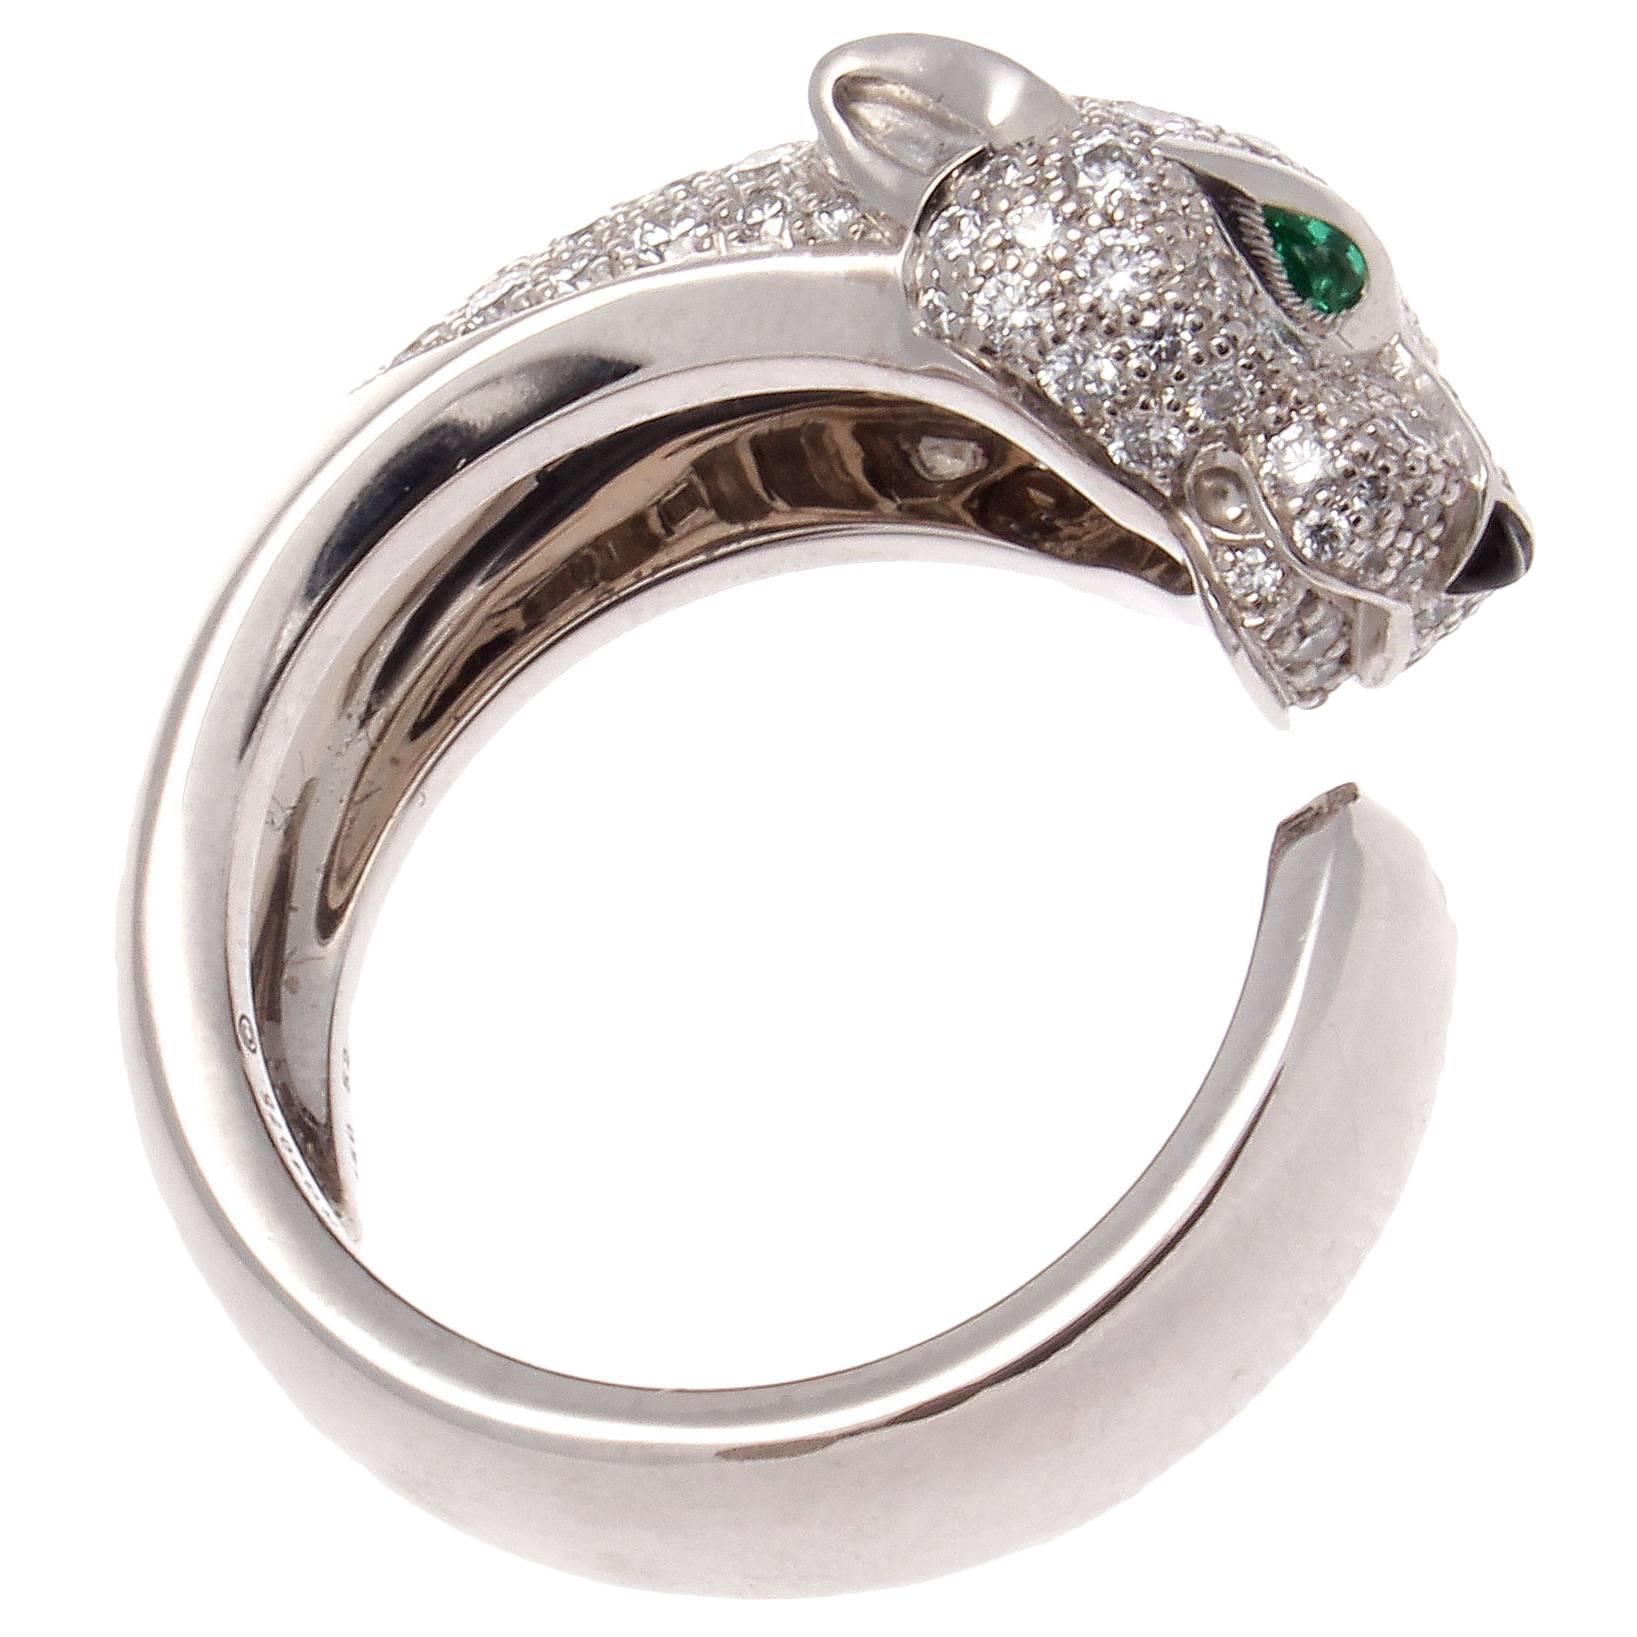 Cartier Panthere Emerald Onyx Diamond Gold Ring